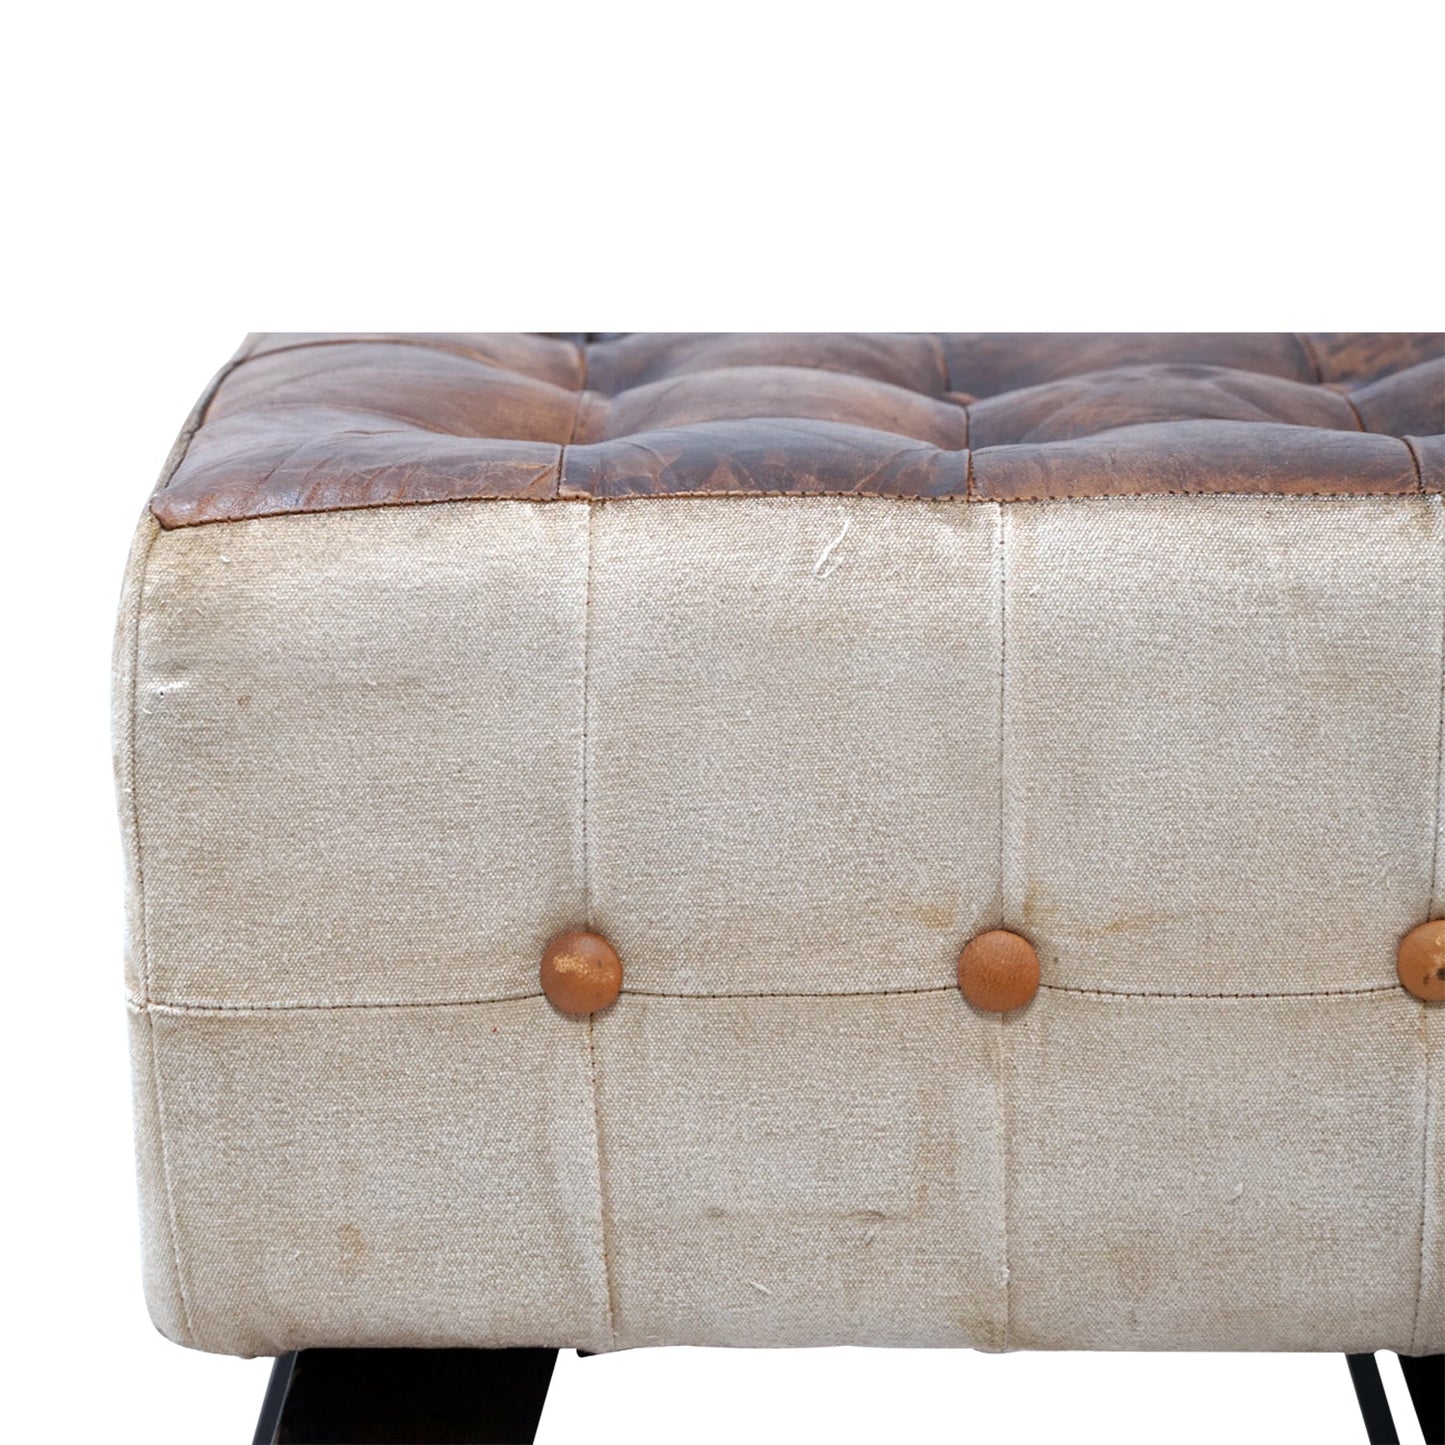 Contemporary Design Upholstered Leather and Canvas Ottoman - Stylla London